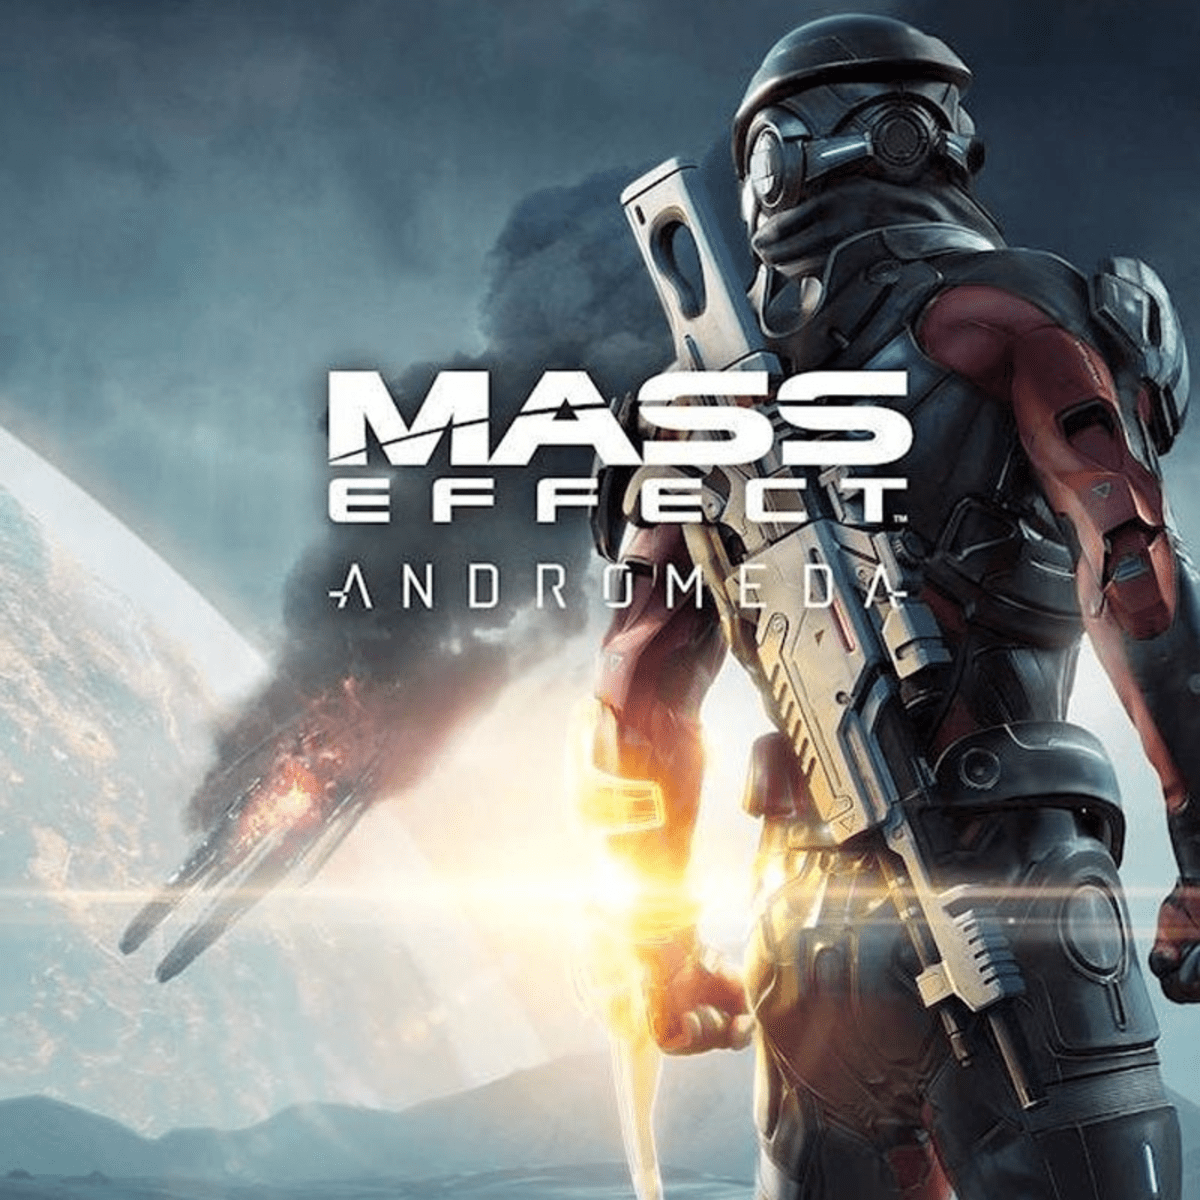 Midas Touch - Mass Effect: Andromeda Wiki